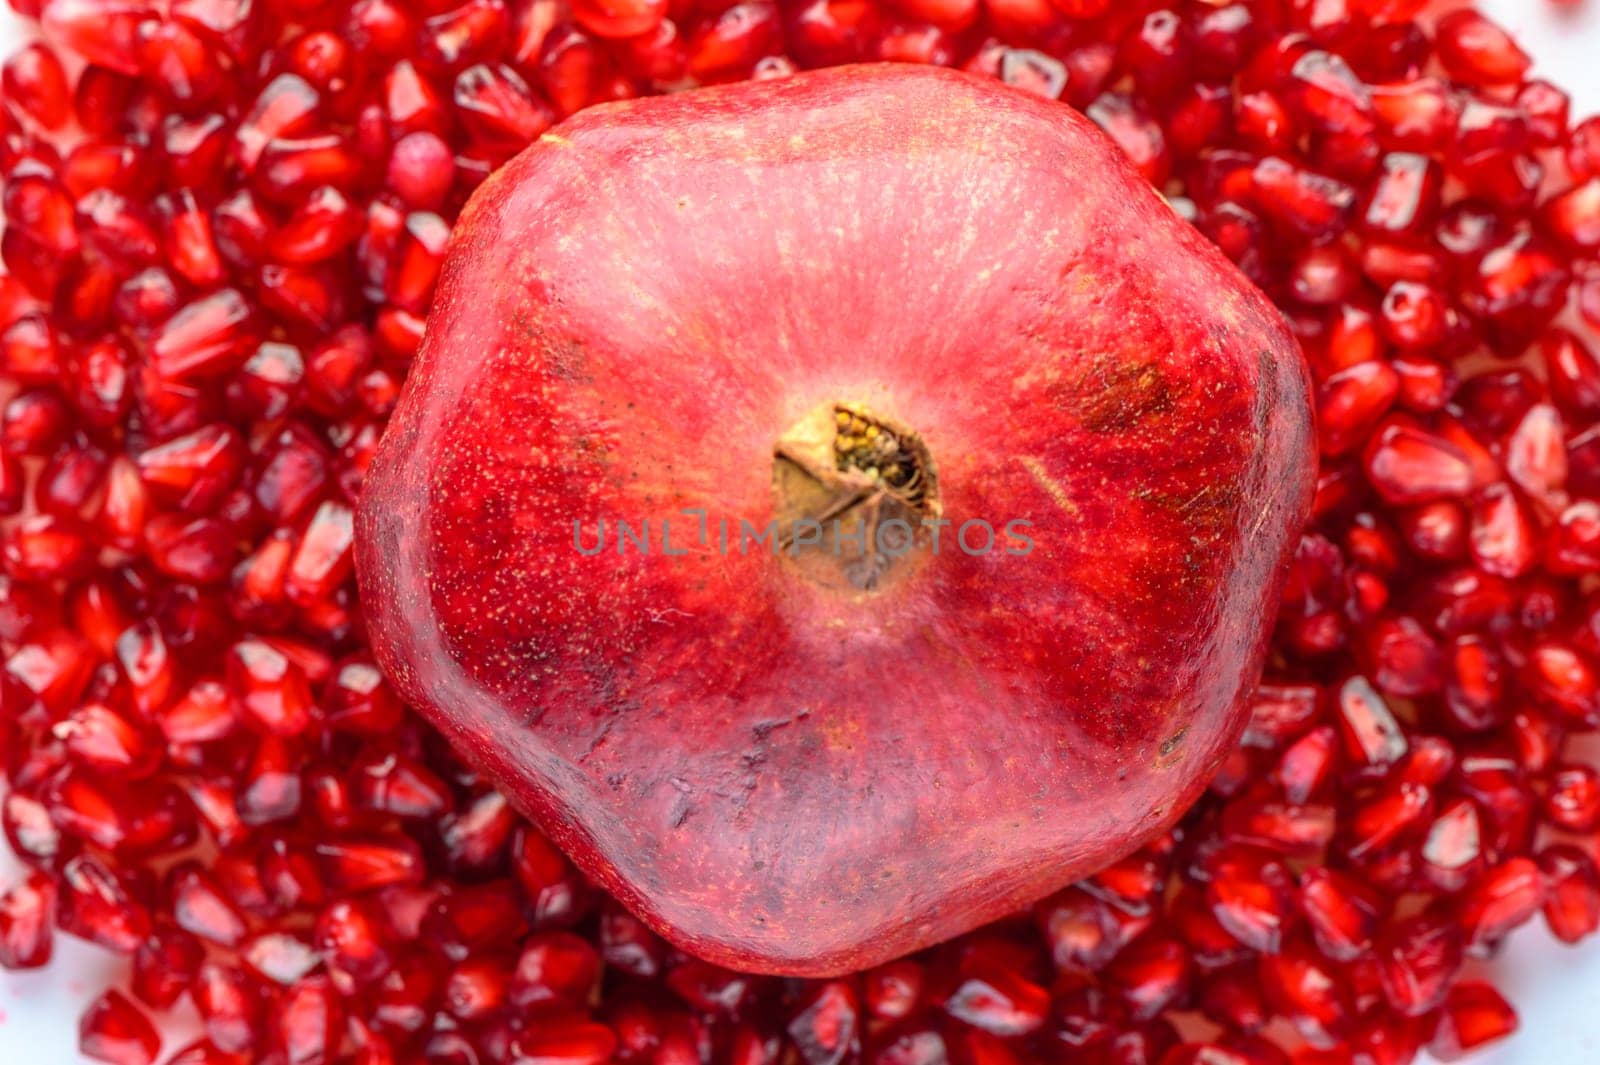 Delicious red ripe juicy pomegranate seed background texture by Mixa74